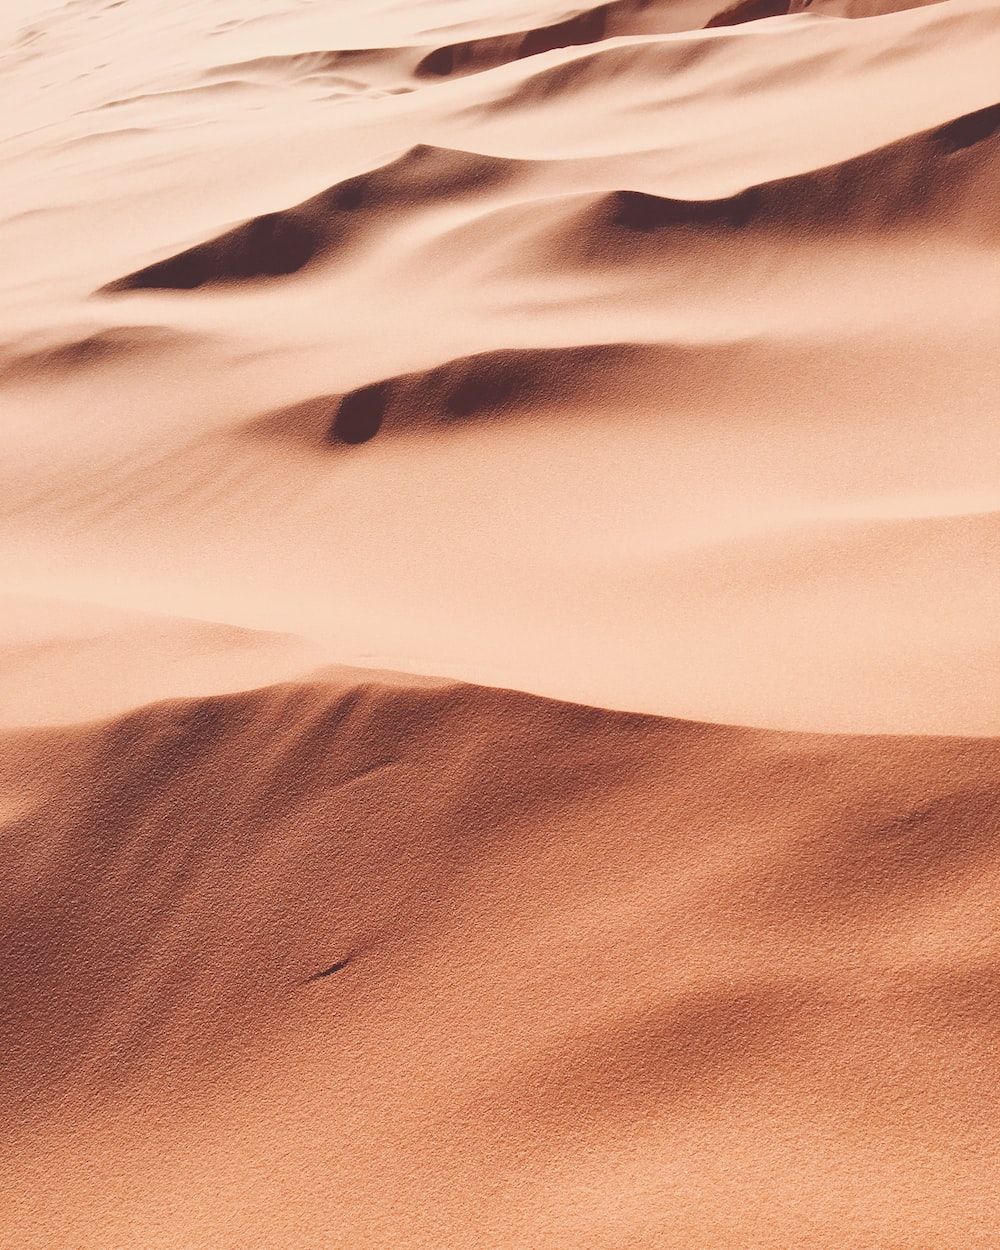 A sand dune in the desert with a small bird in the lower left corner. - Desert